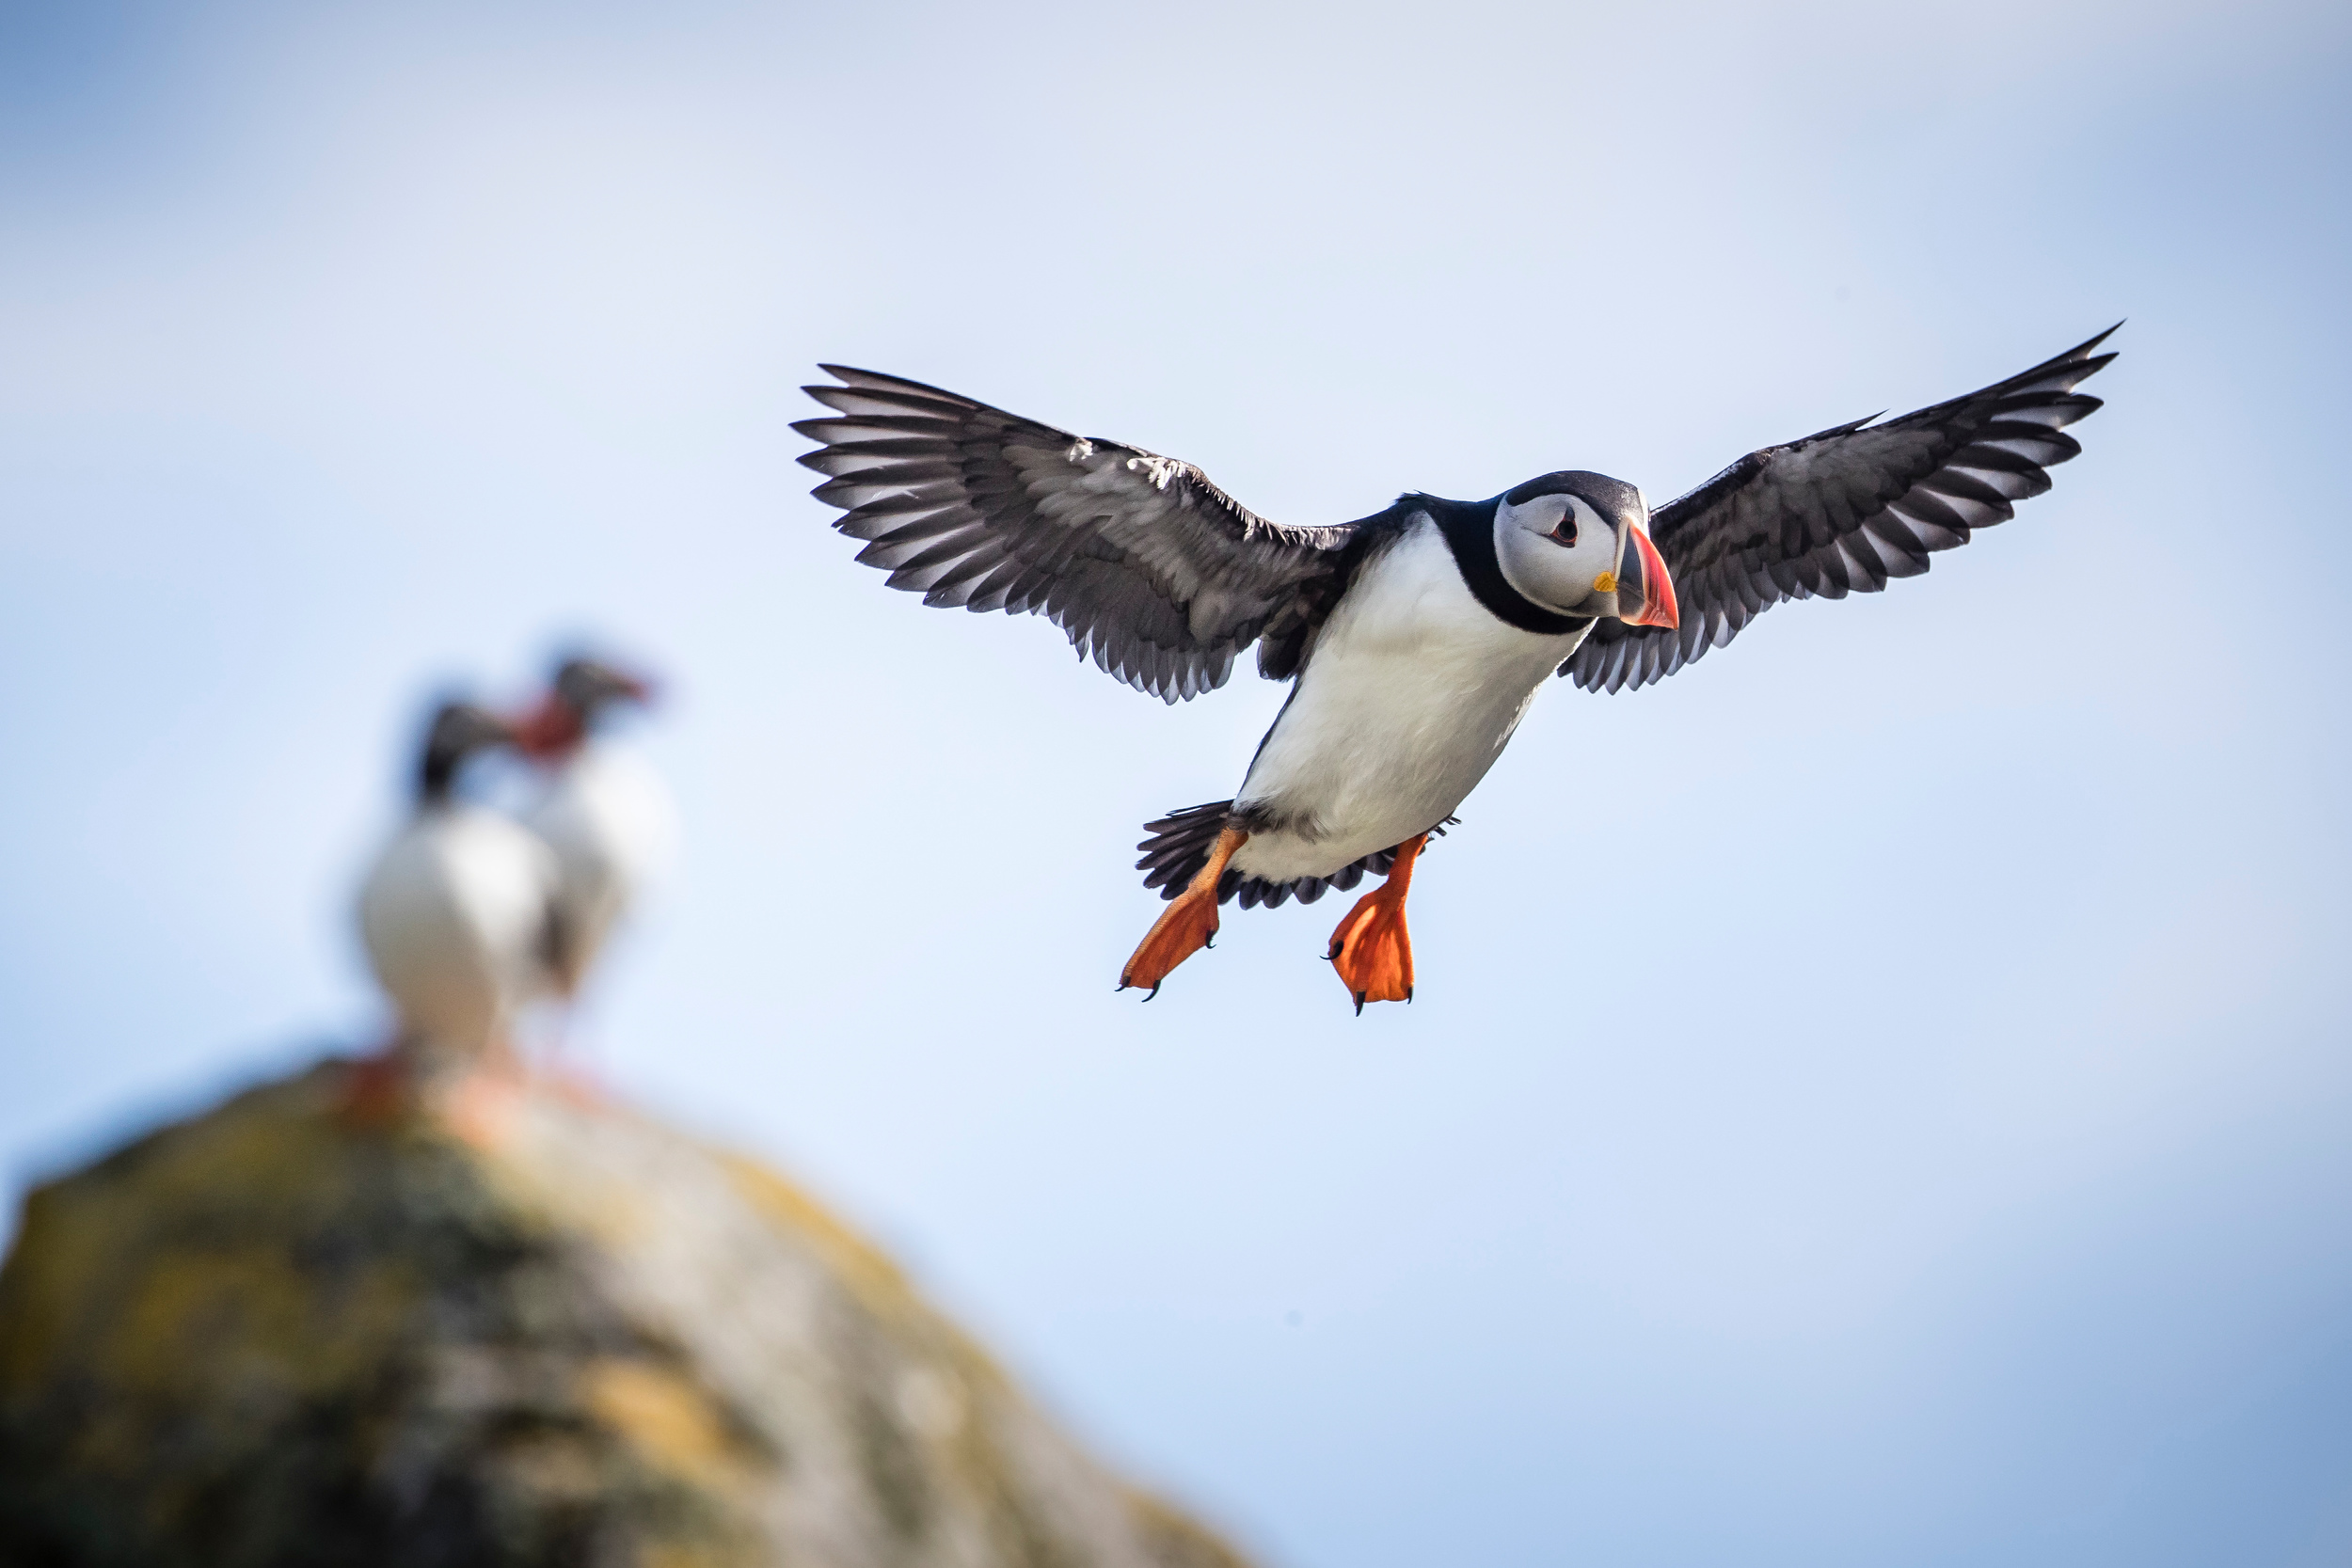 puffin flying